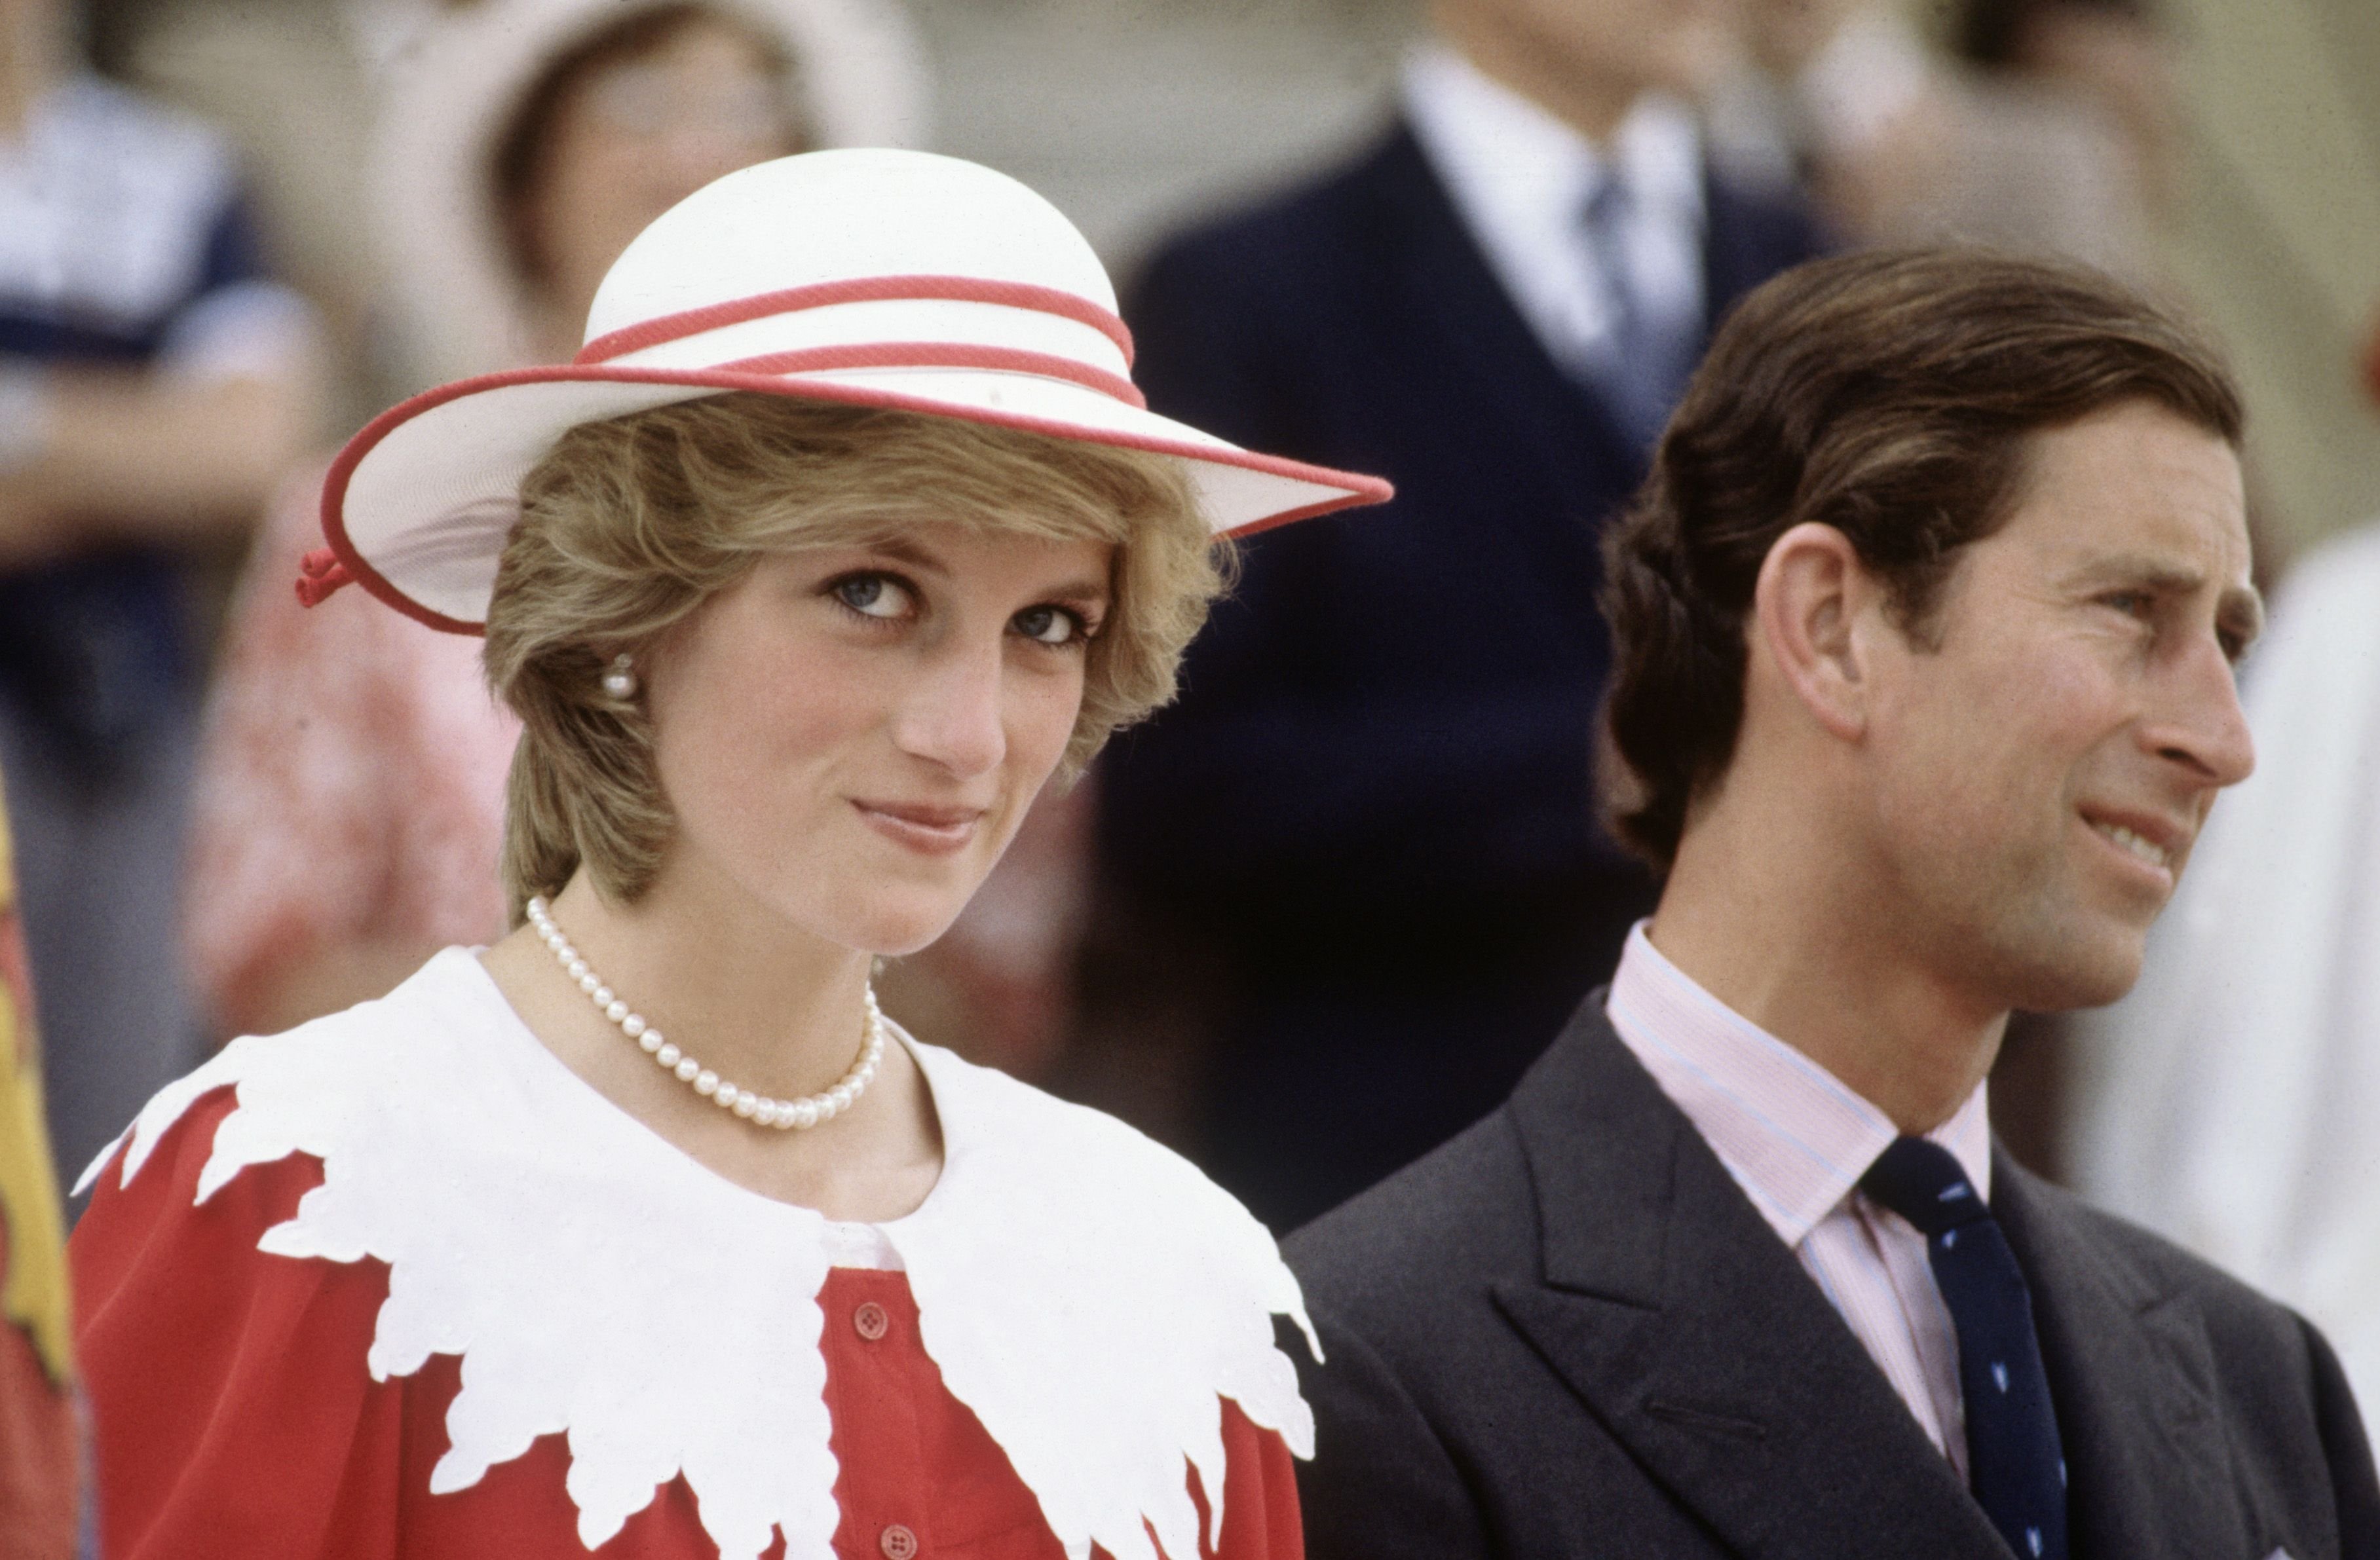 Diana Princess of Wales and Prince Charles during the Royal Tour of Canada in 1983 | Photo: Getty Images